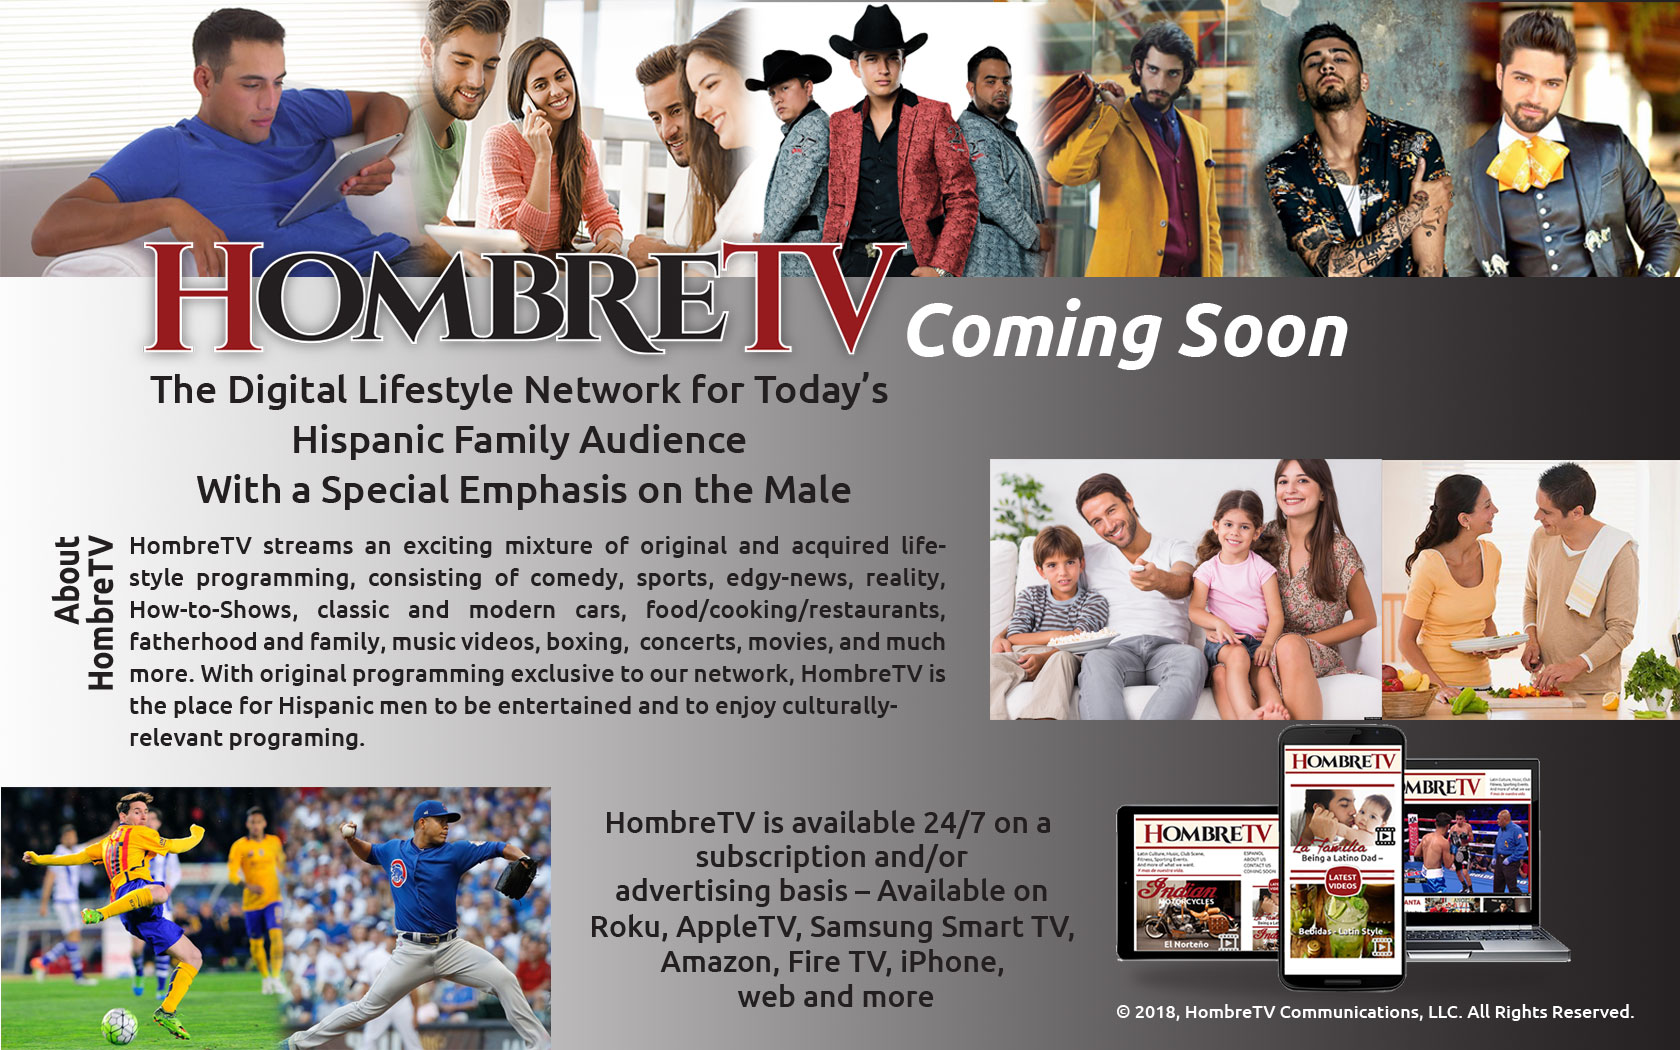 HombreTV streams an exciting mixture of original and acquired lifestyle programming, consisting of comedy, sports, edgy-news, reality, How-to-Shows, classic and modern cars, food/cooking/restaurants, fatherhood and family, music videos, boxing, concerts, movies, and much more. With original programming exclusive to our network, HombreTV is the place for Hispanic men to be entertained and to enjoy culturally- relevant programing.